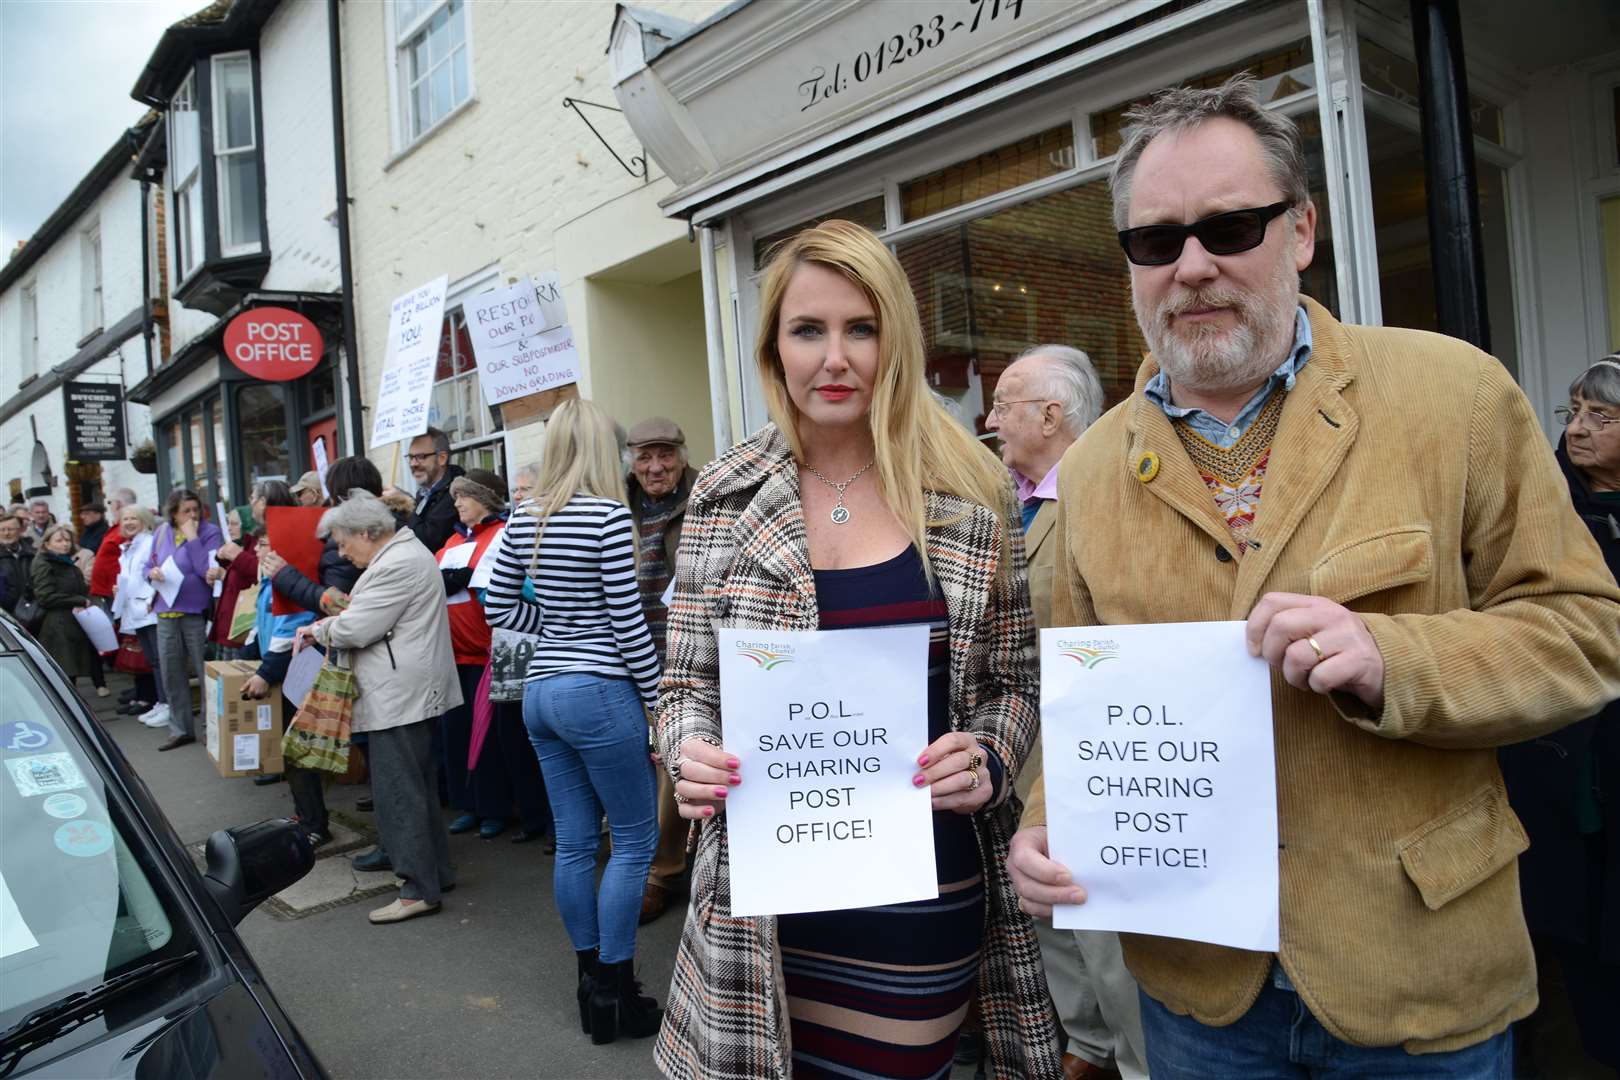 Nancy Sorrell and Vic Reeves were amongst the protestors when the Post Office temporarily closed in 2016